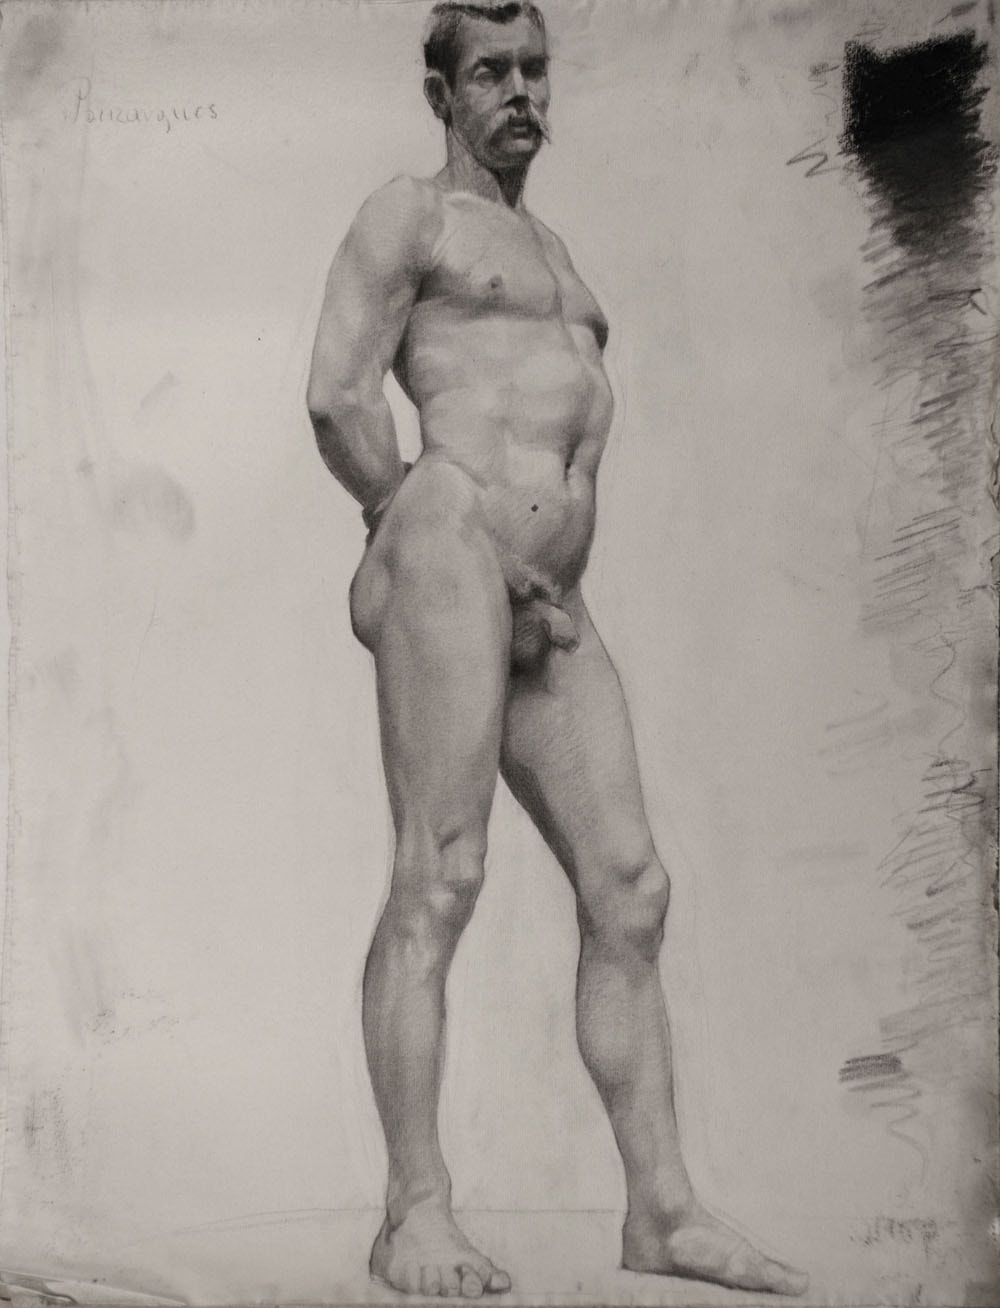 Lucien-Paul Pouzargues male nude with hands behind back